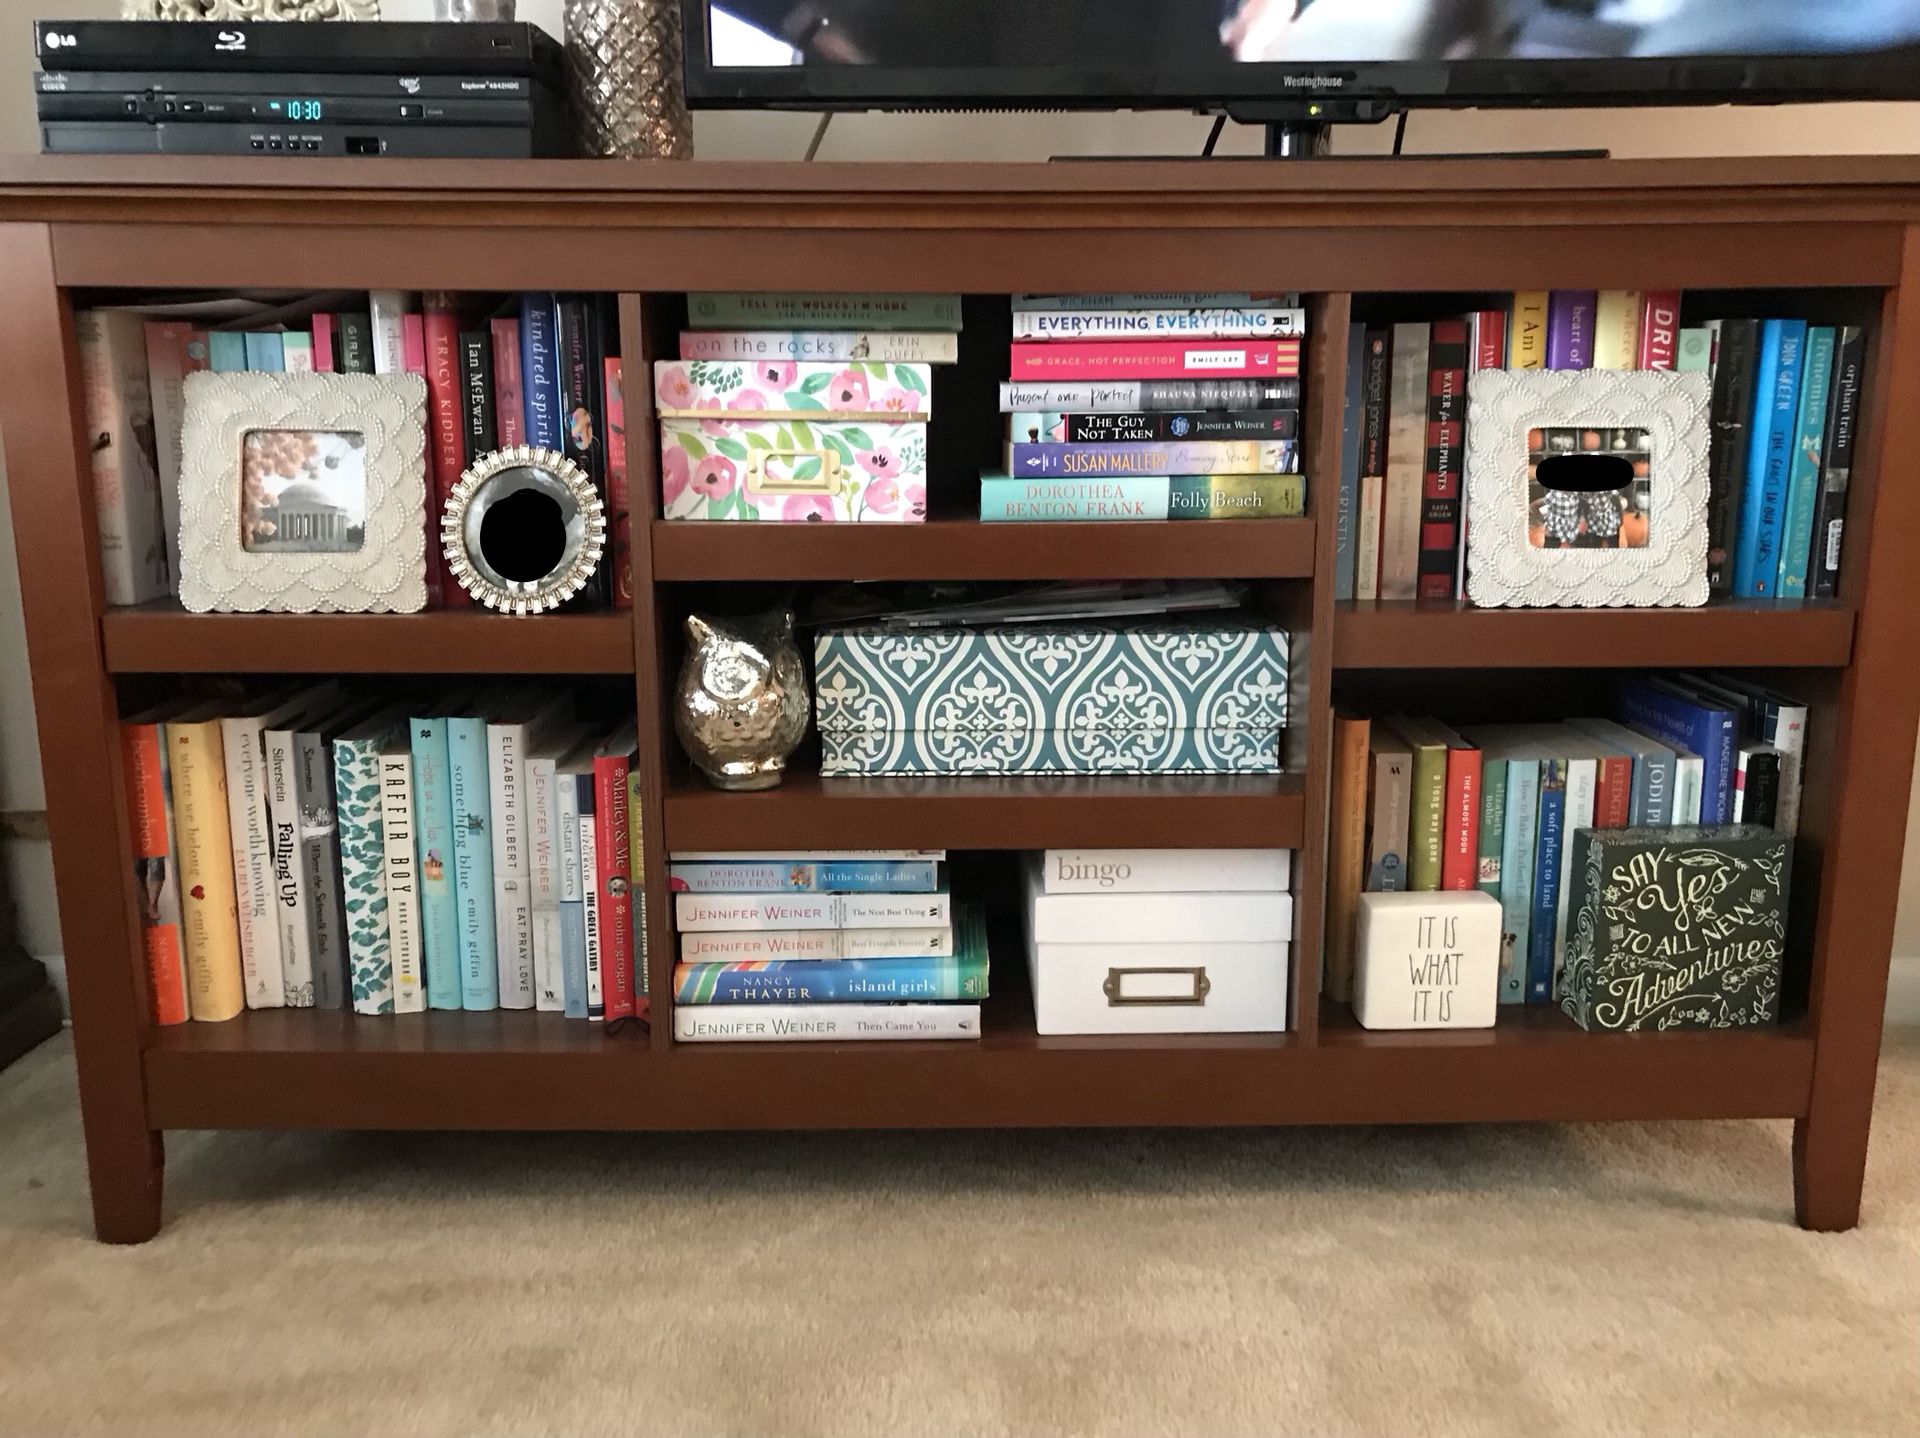 Carson Threshold Bookcase from Target